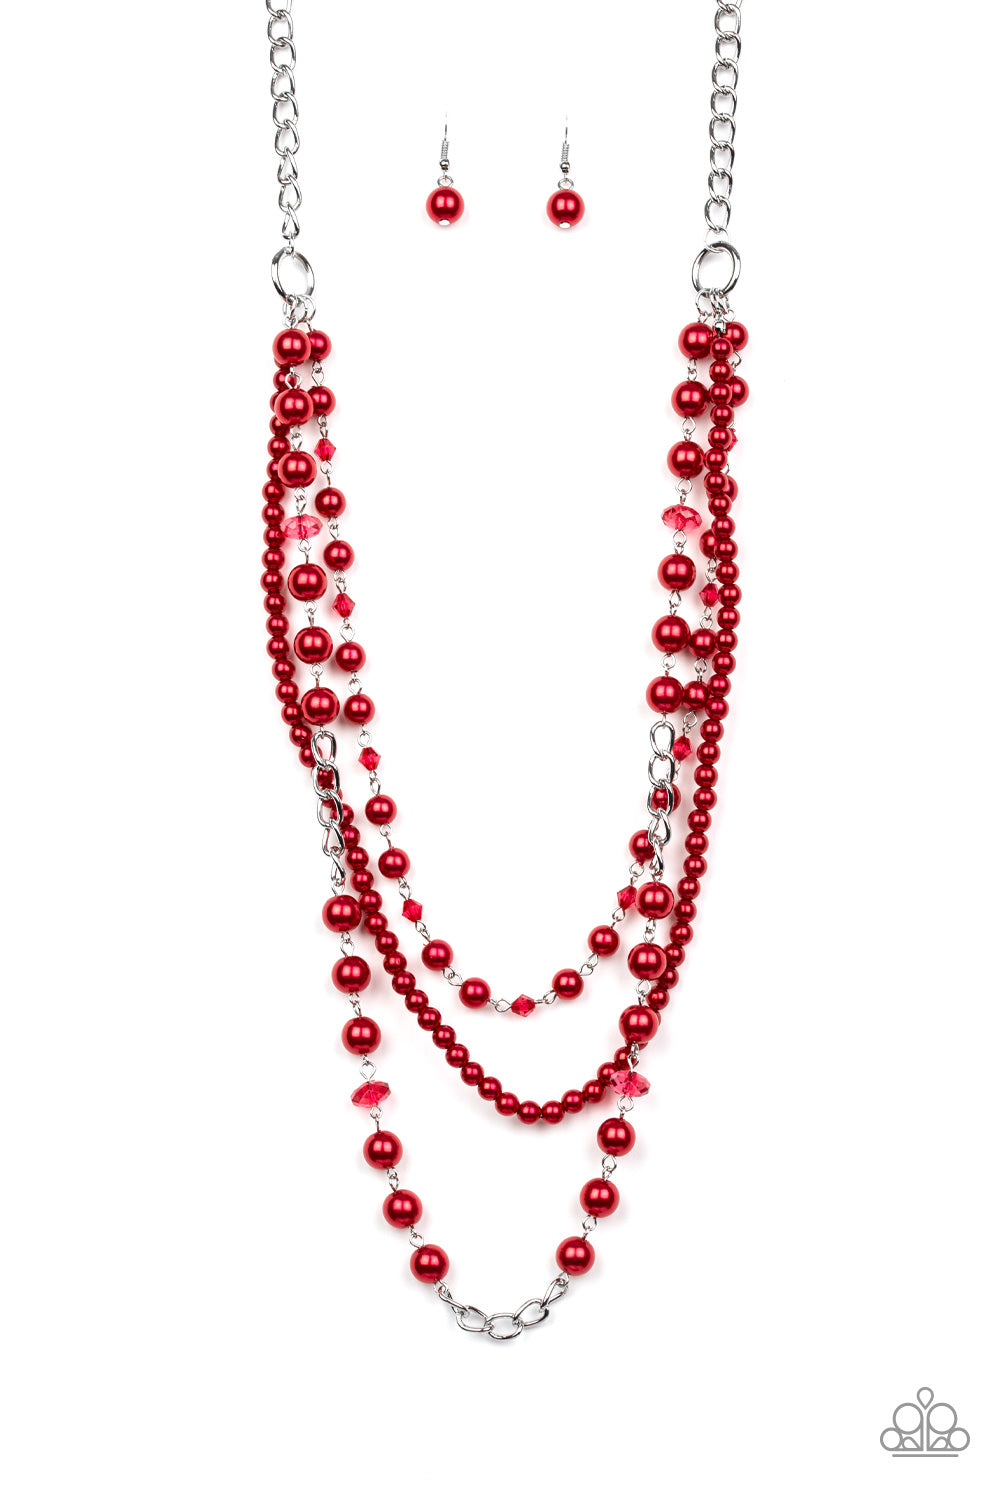 New York City Chic Necklace__Red